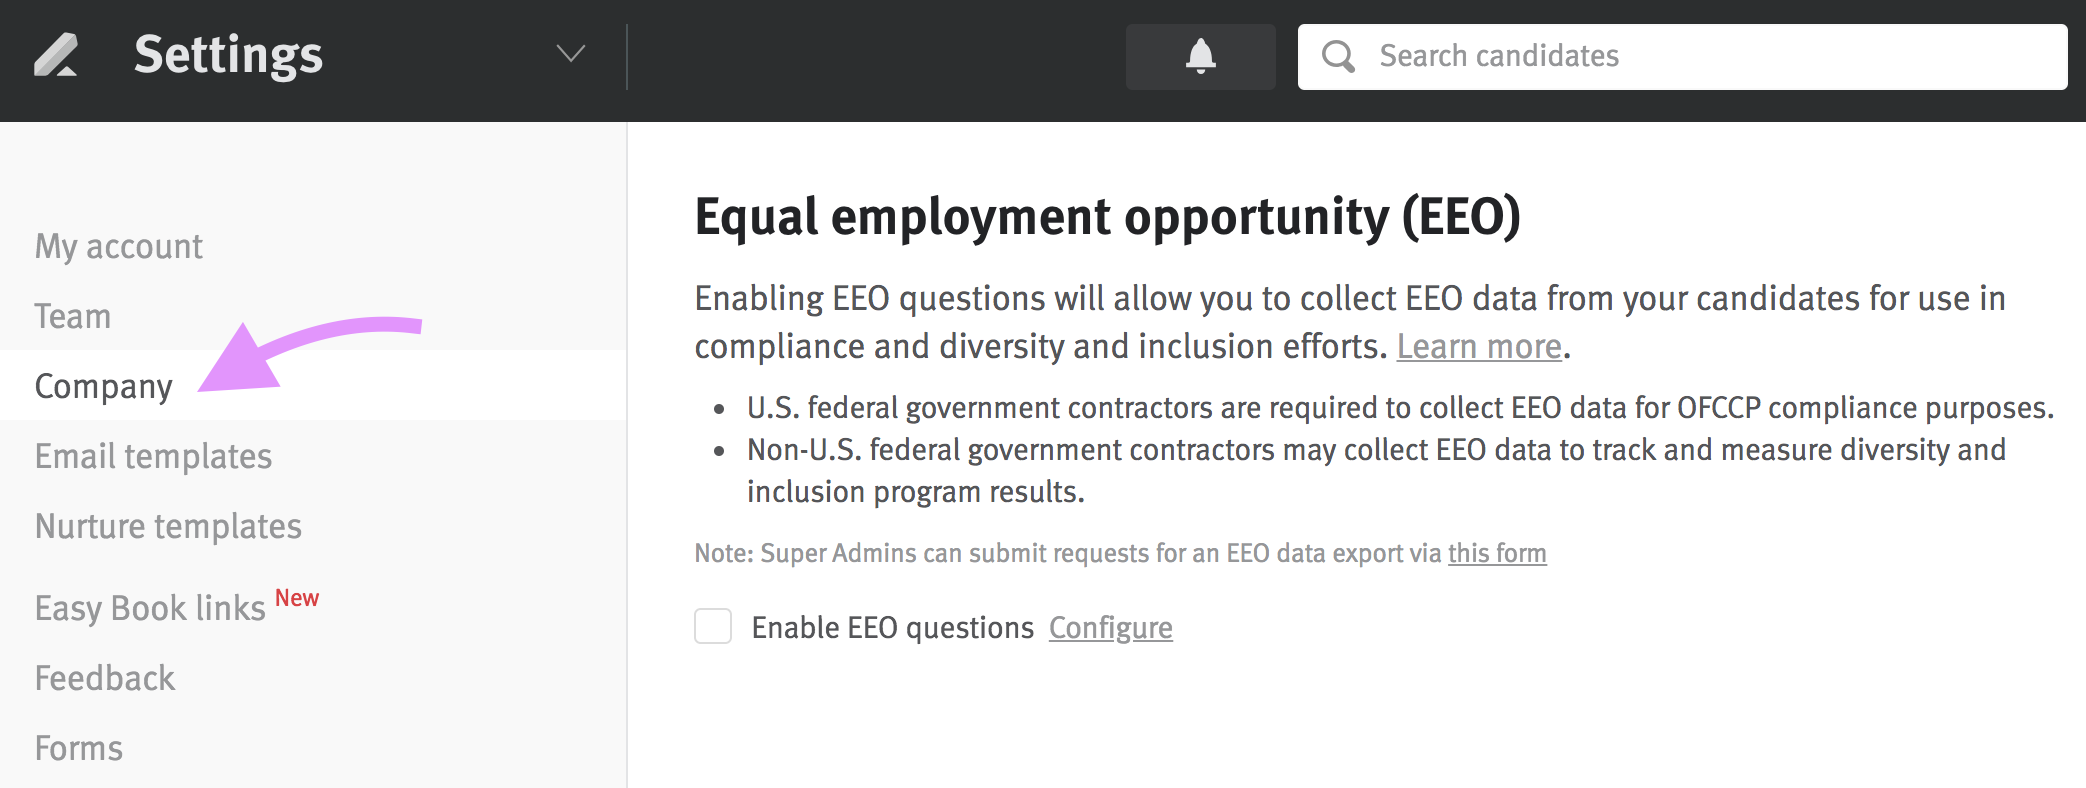 How do I enable EEO questions and export candidate responses? – Lever